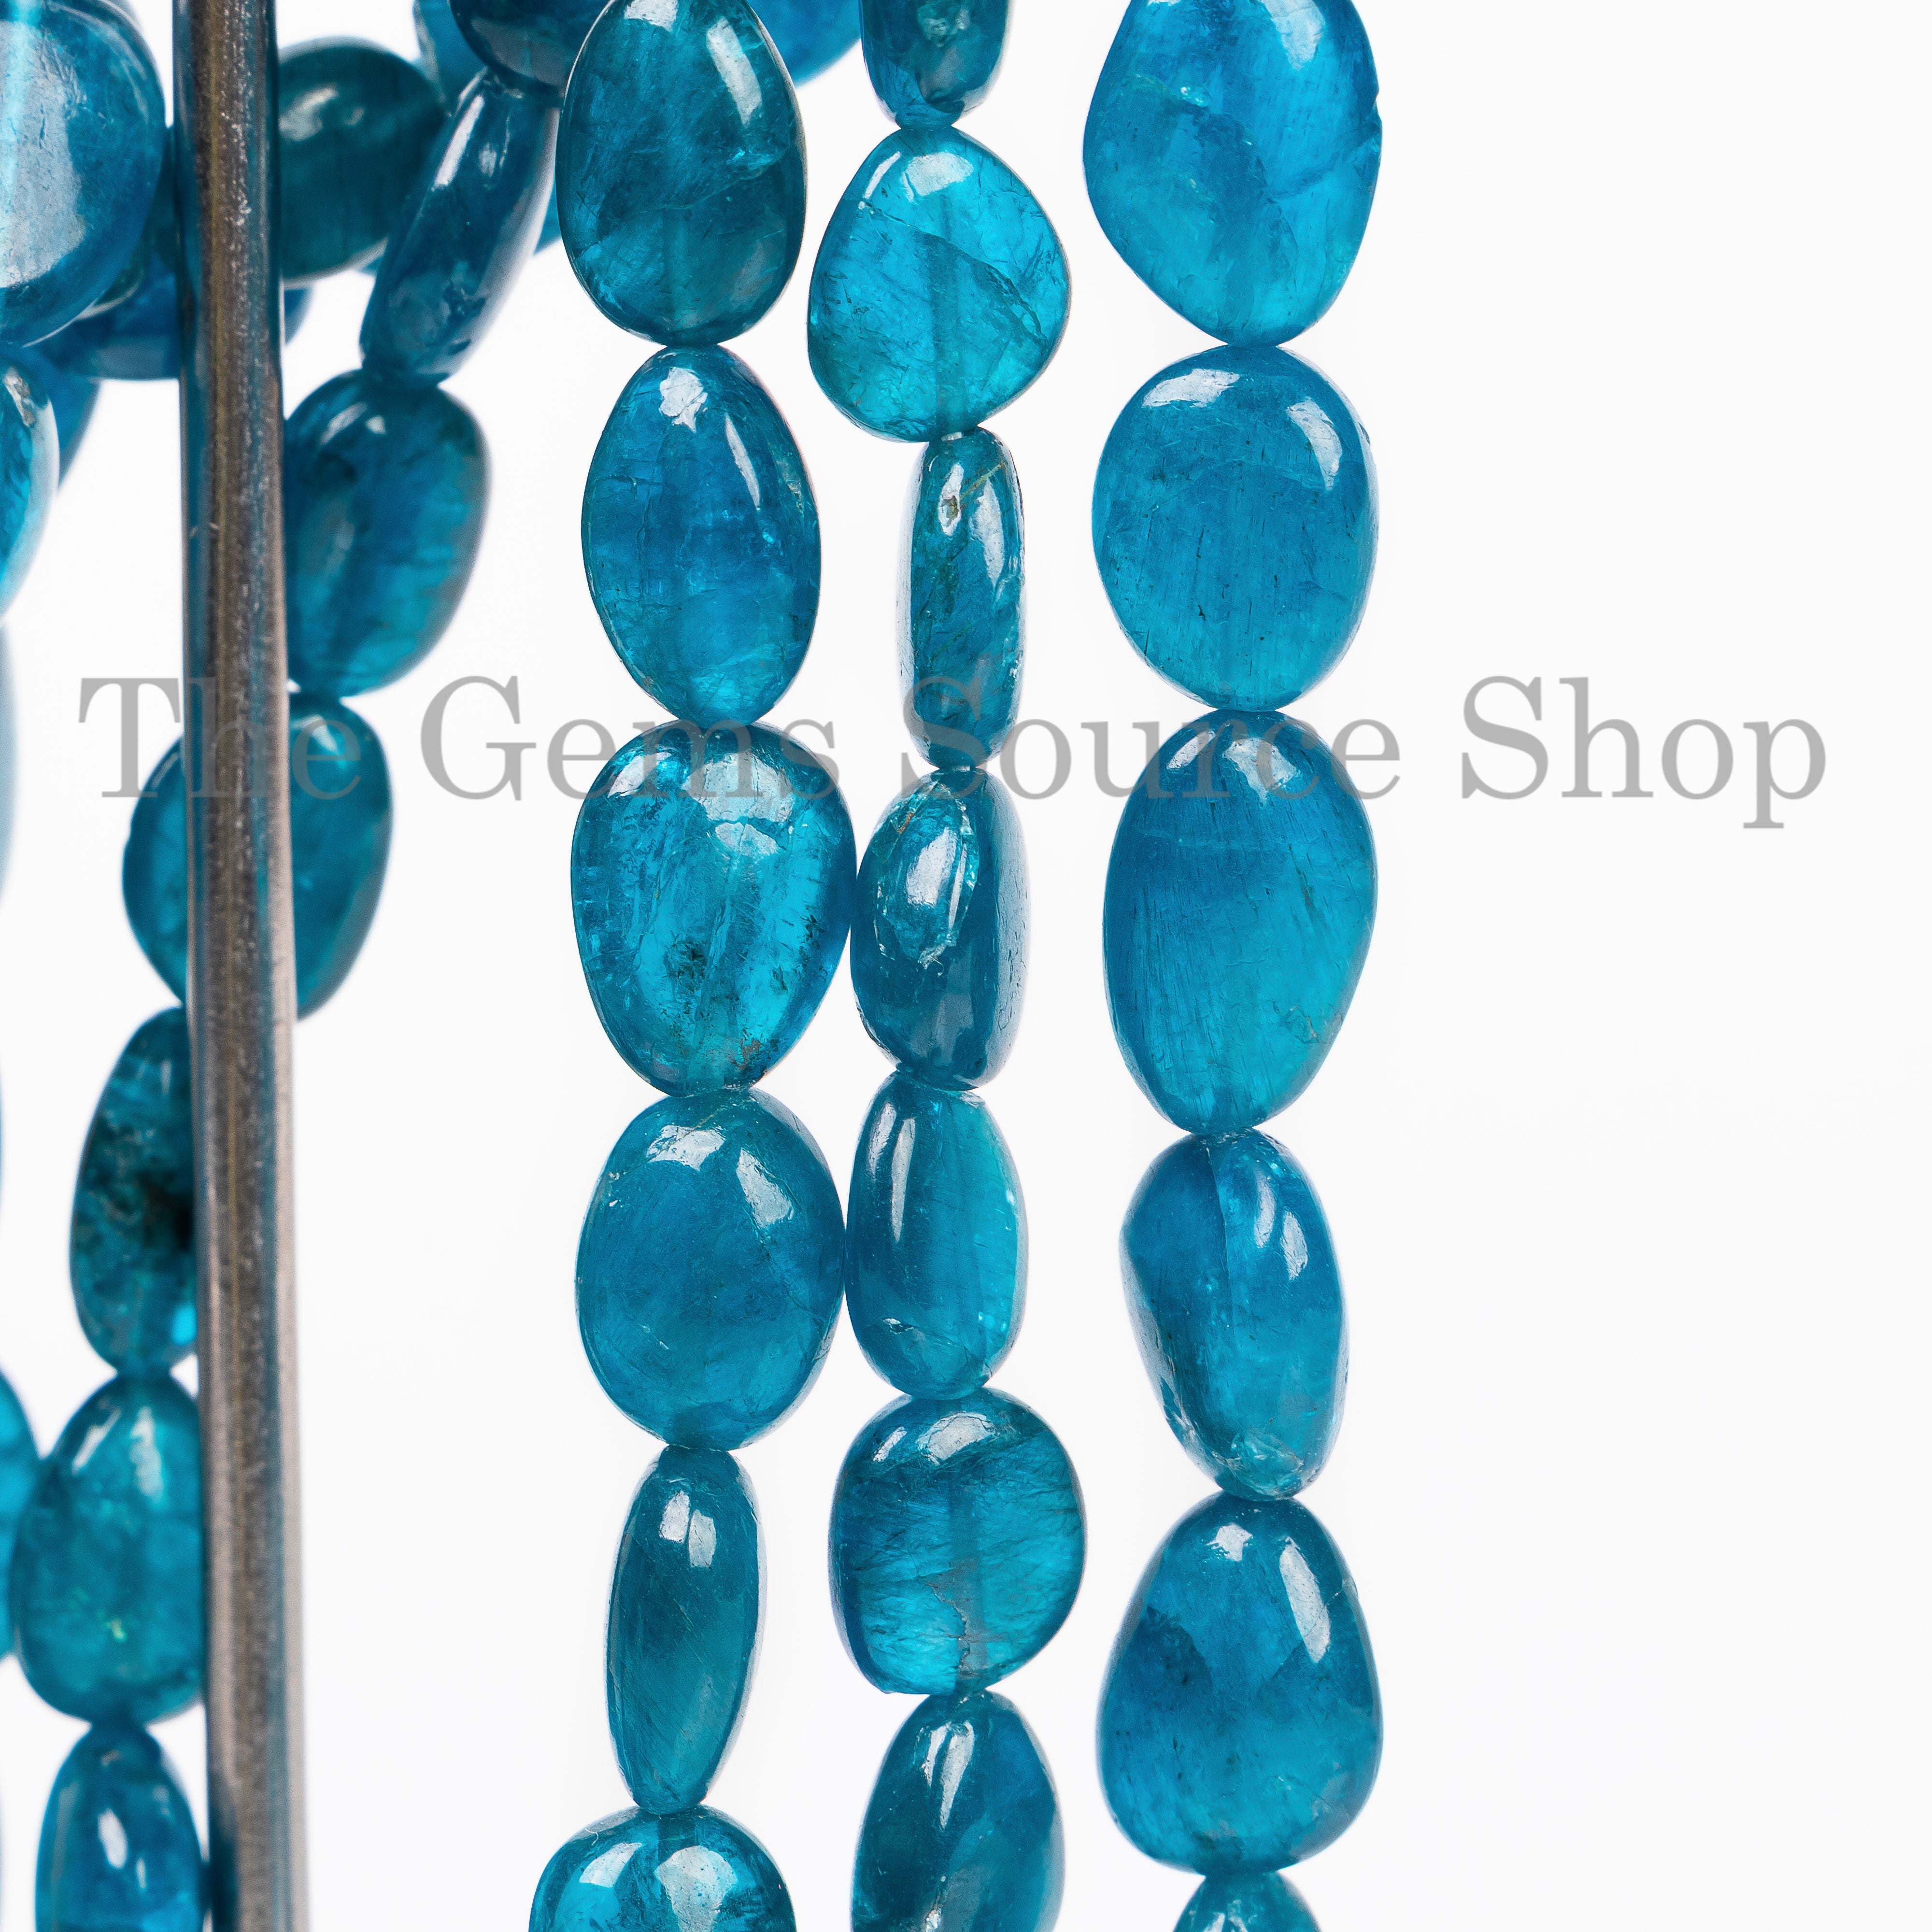 Neon Apatite Smooth Nugget Gemstone Beads For Jewelry Making